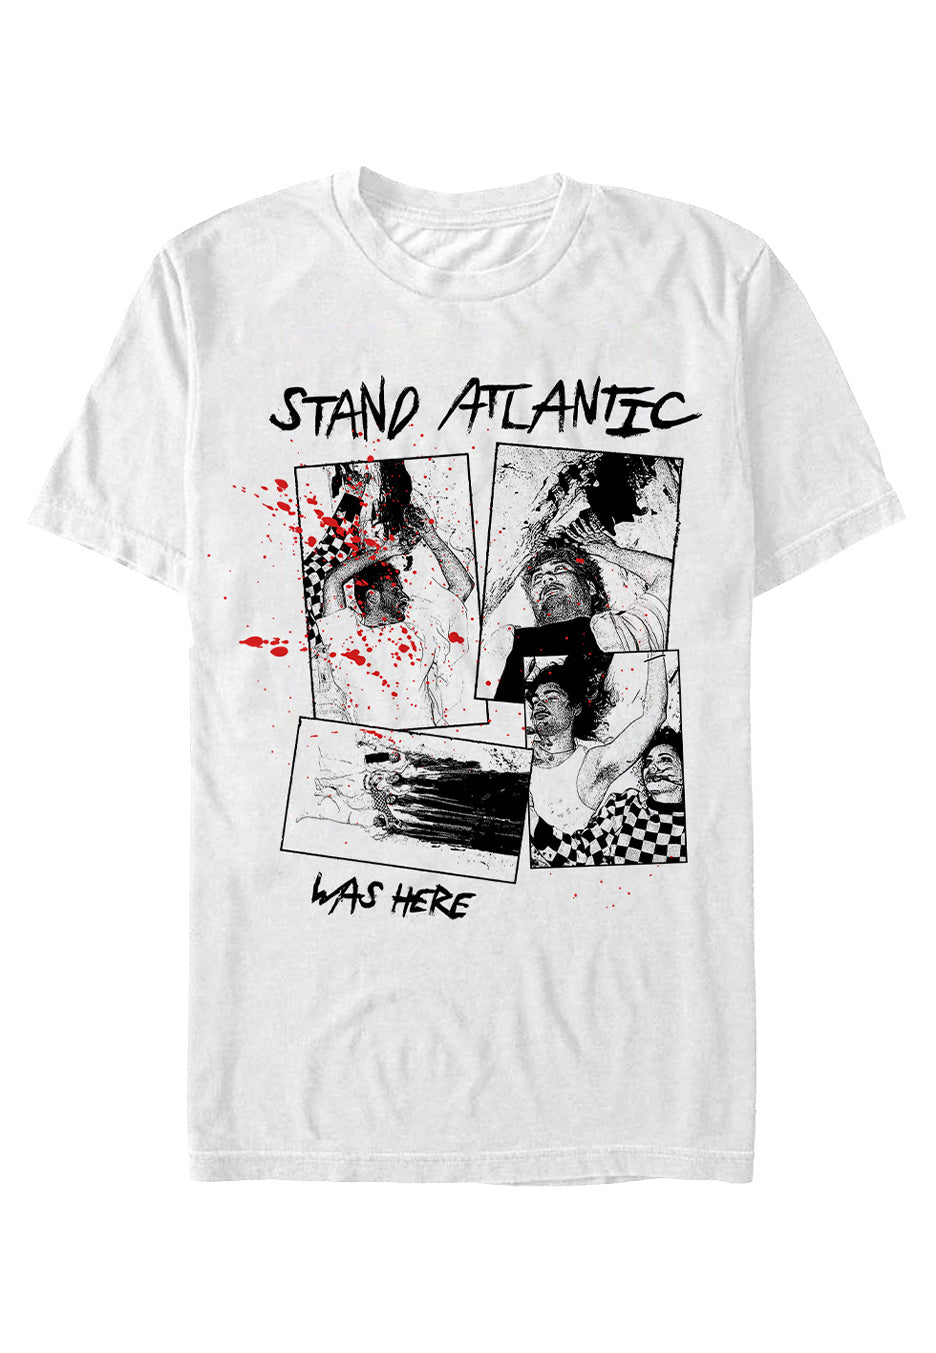 Stand Atlantic - WAS HERE Special Pack White - T-Shirt